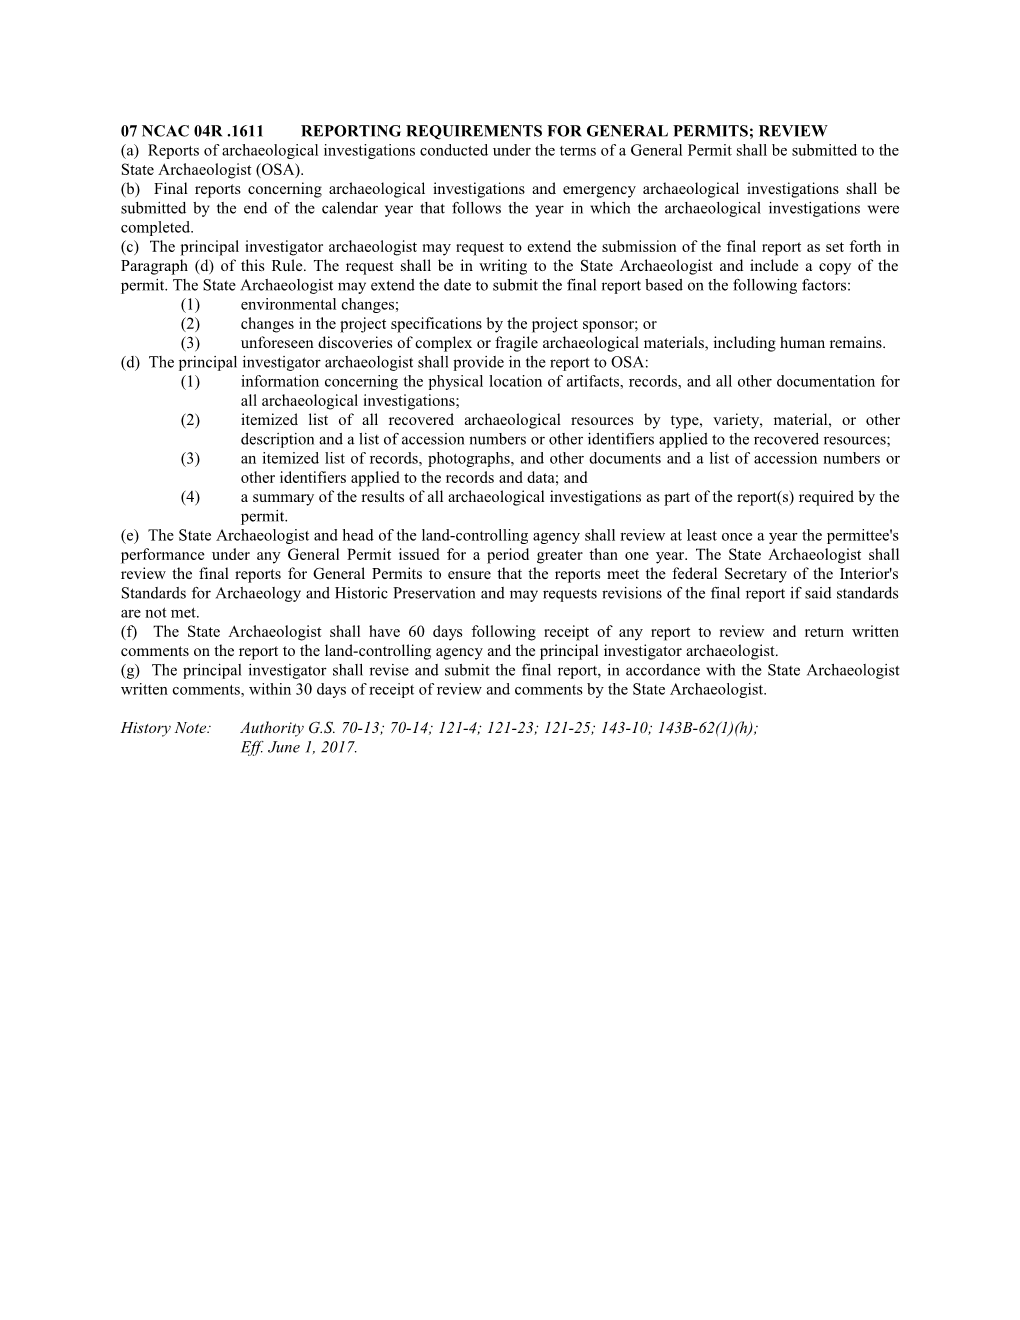 07 Ncac 04R .1611Reporting Requirements for General Permits; Review